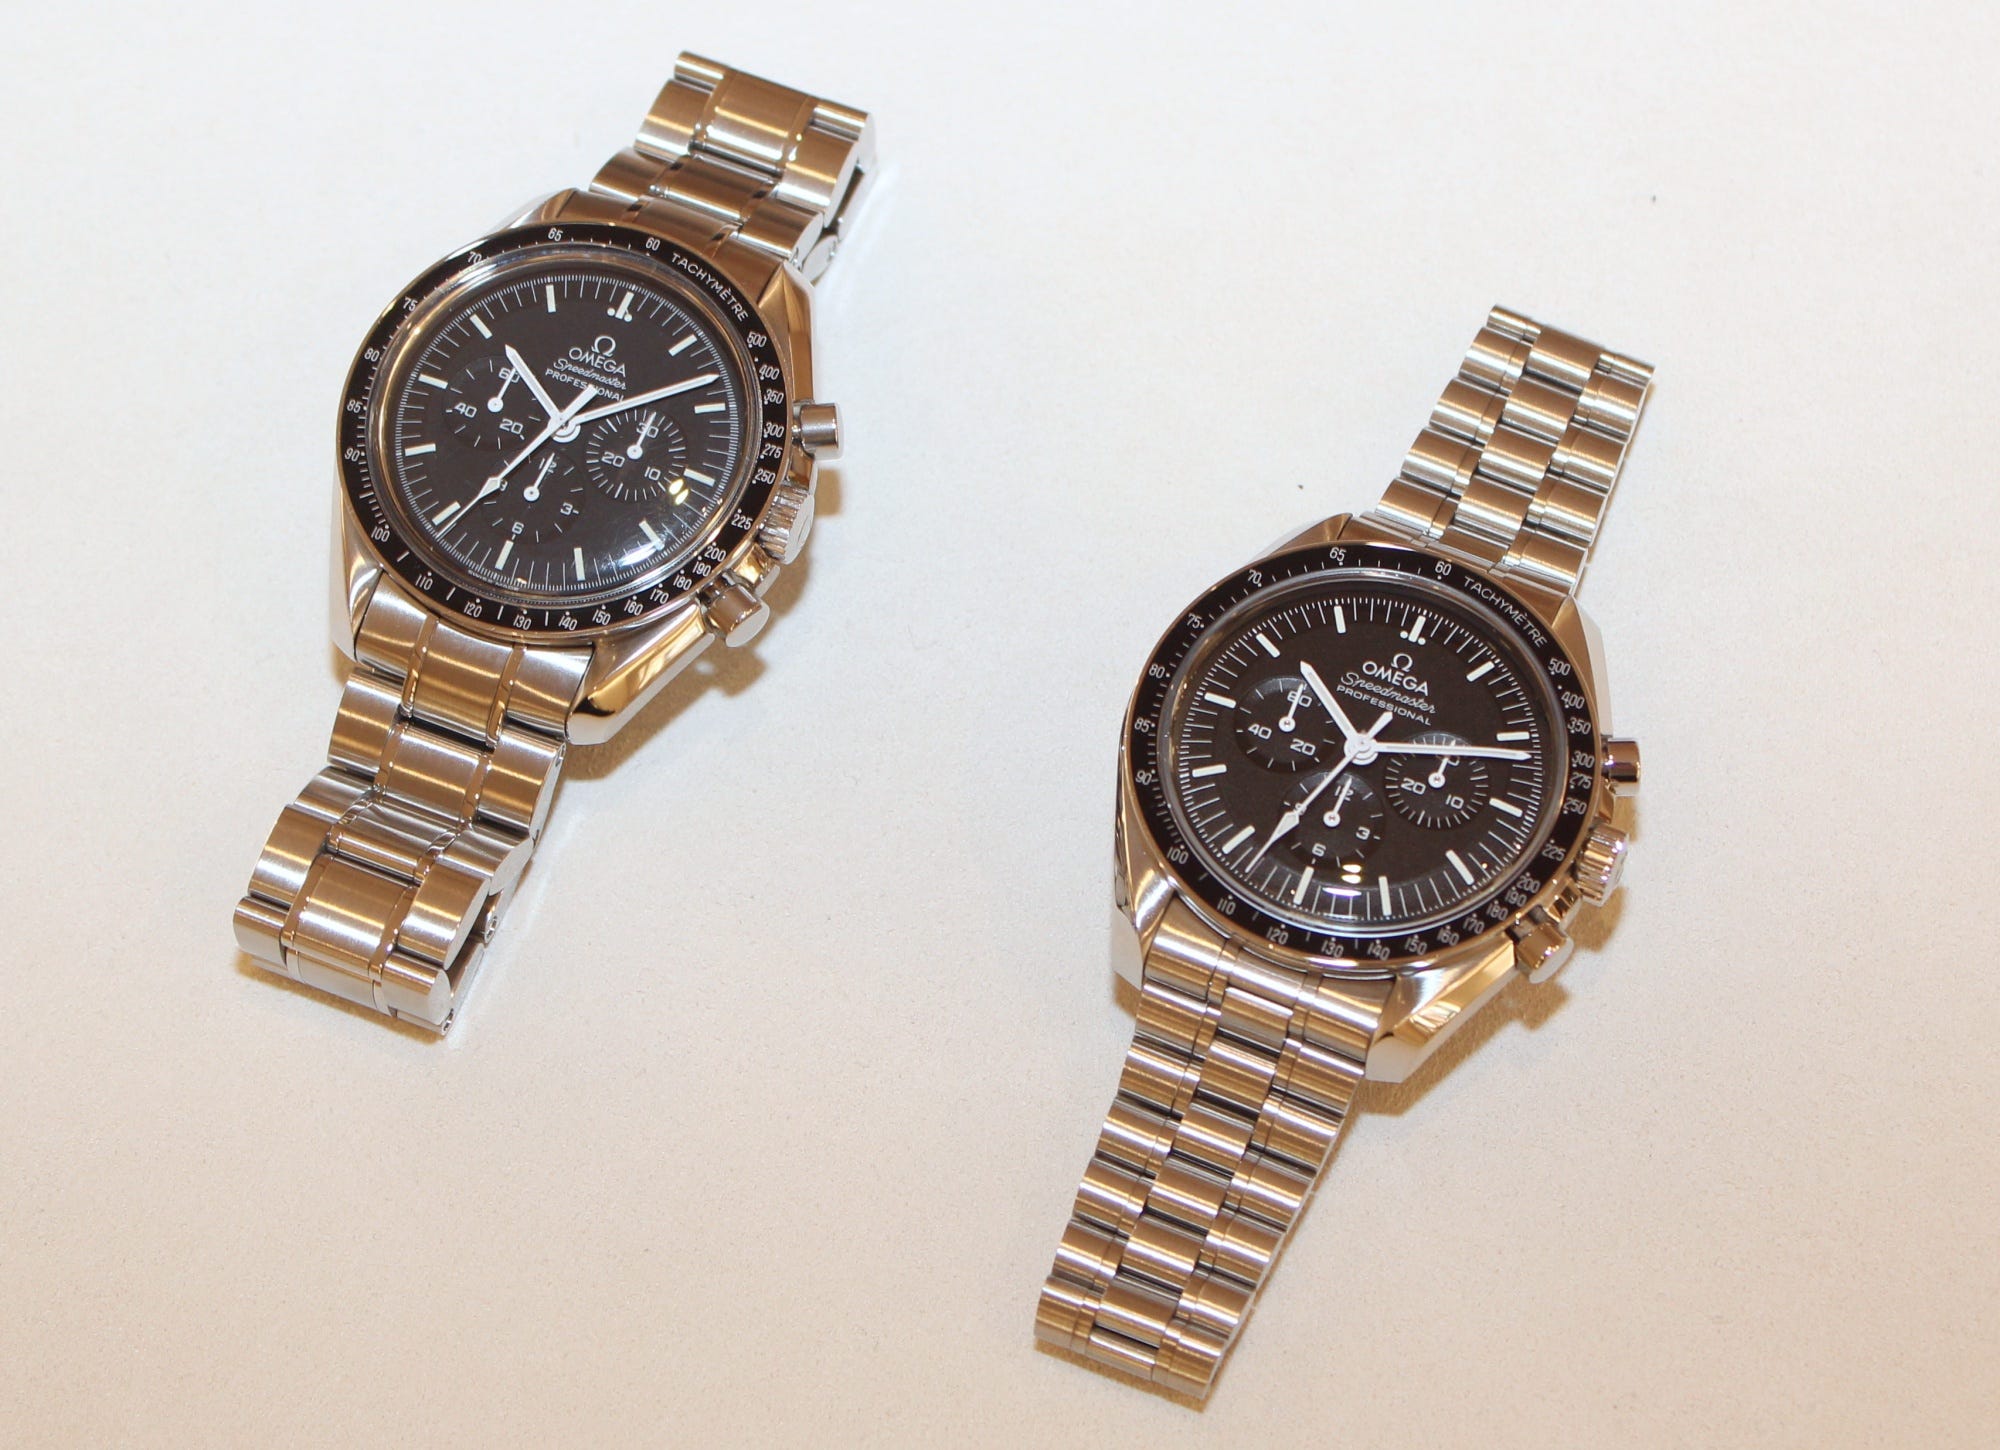 'Variations on a Theme': OMEGA debuts its latest Moonwatch, now with ...